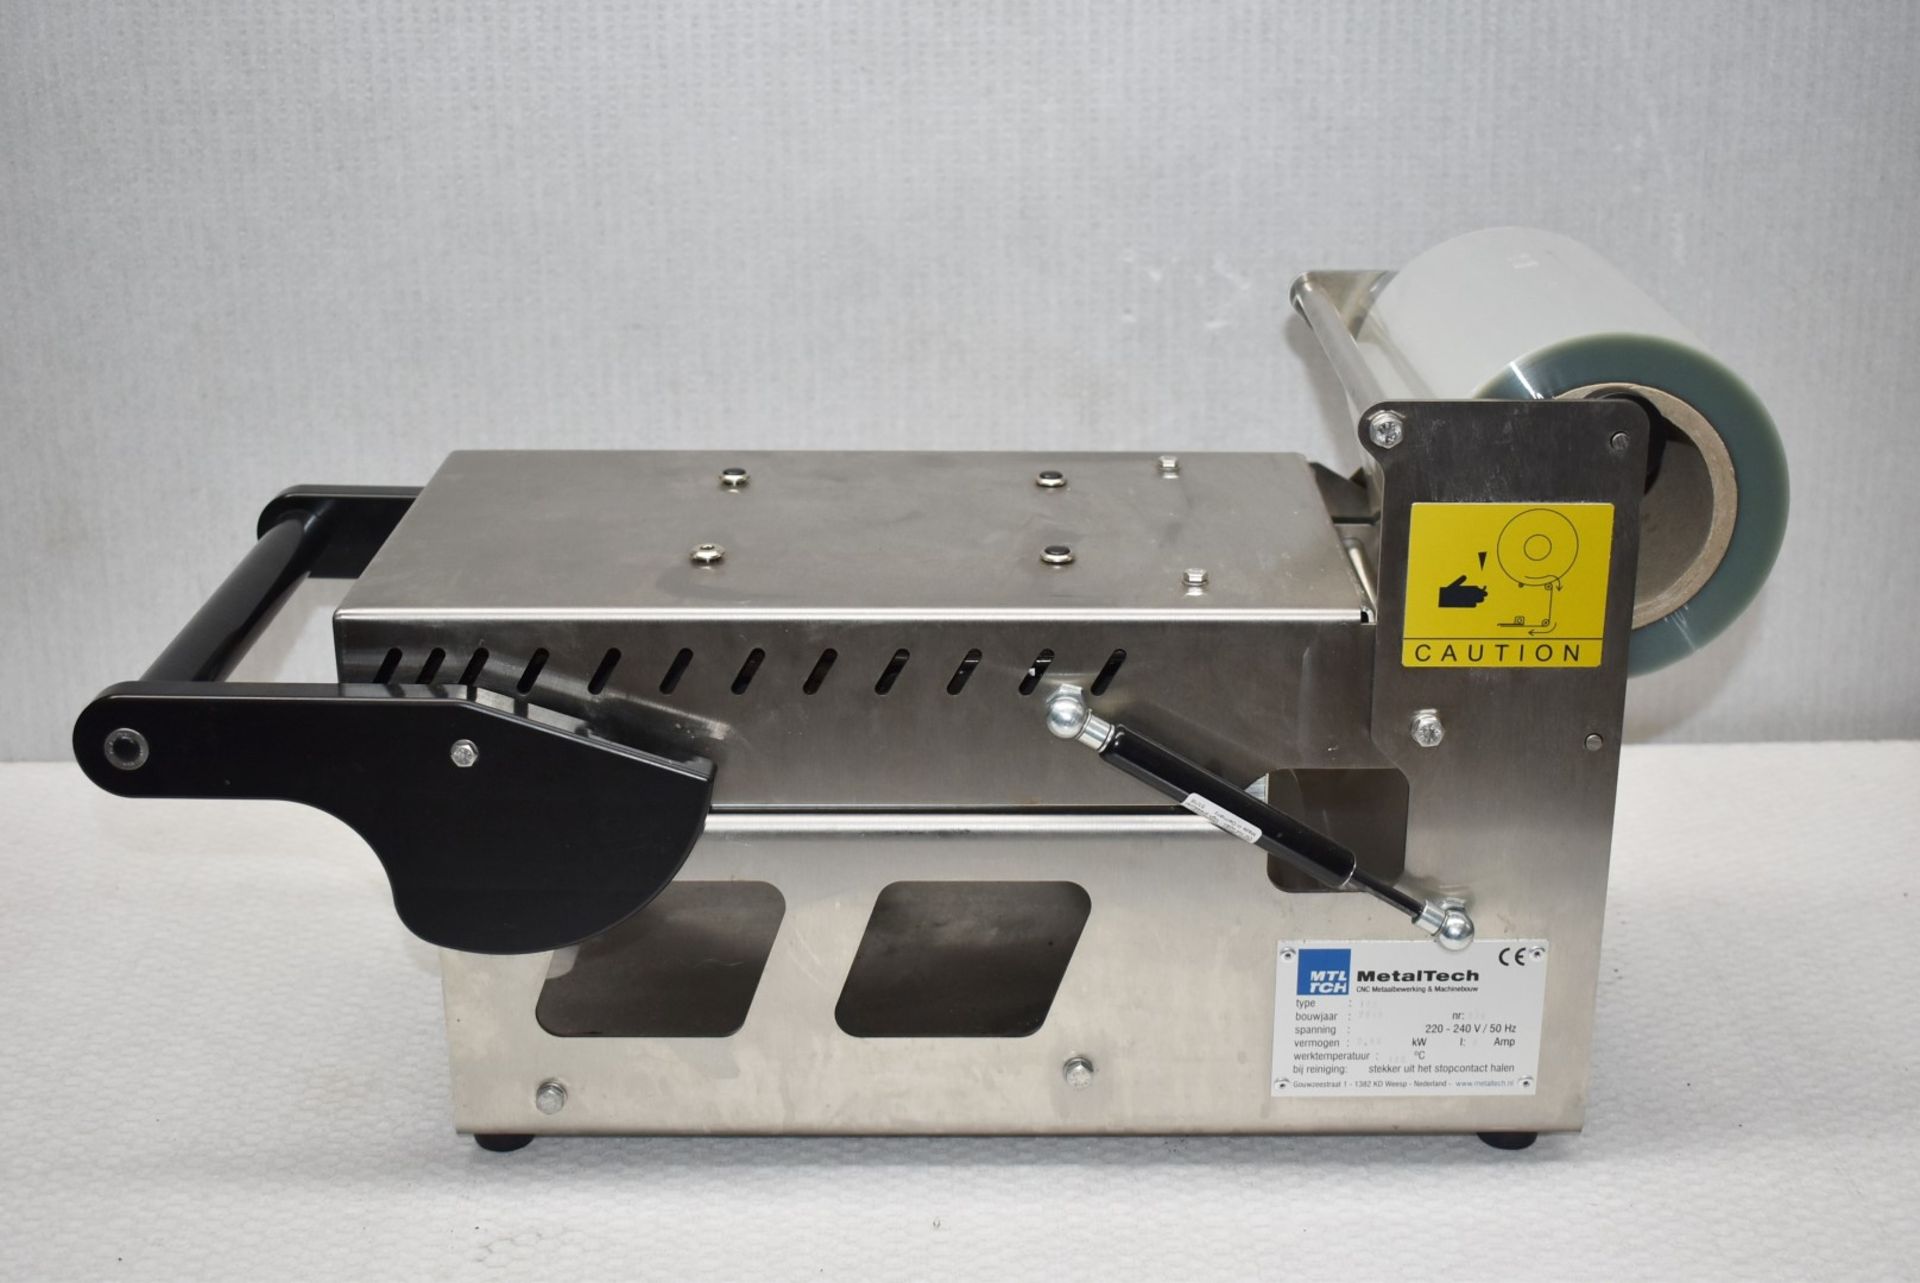 1 x Metal Tech Manual Food Tray Sealing Machine - Type 190 - 2018 Model - 240v - Recently Removed - Image 3 of 7